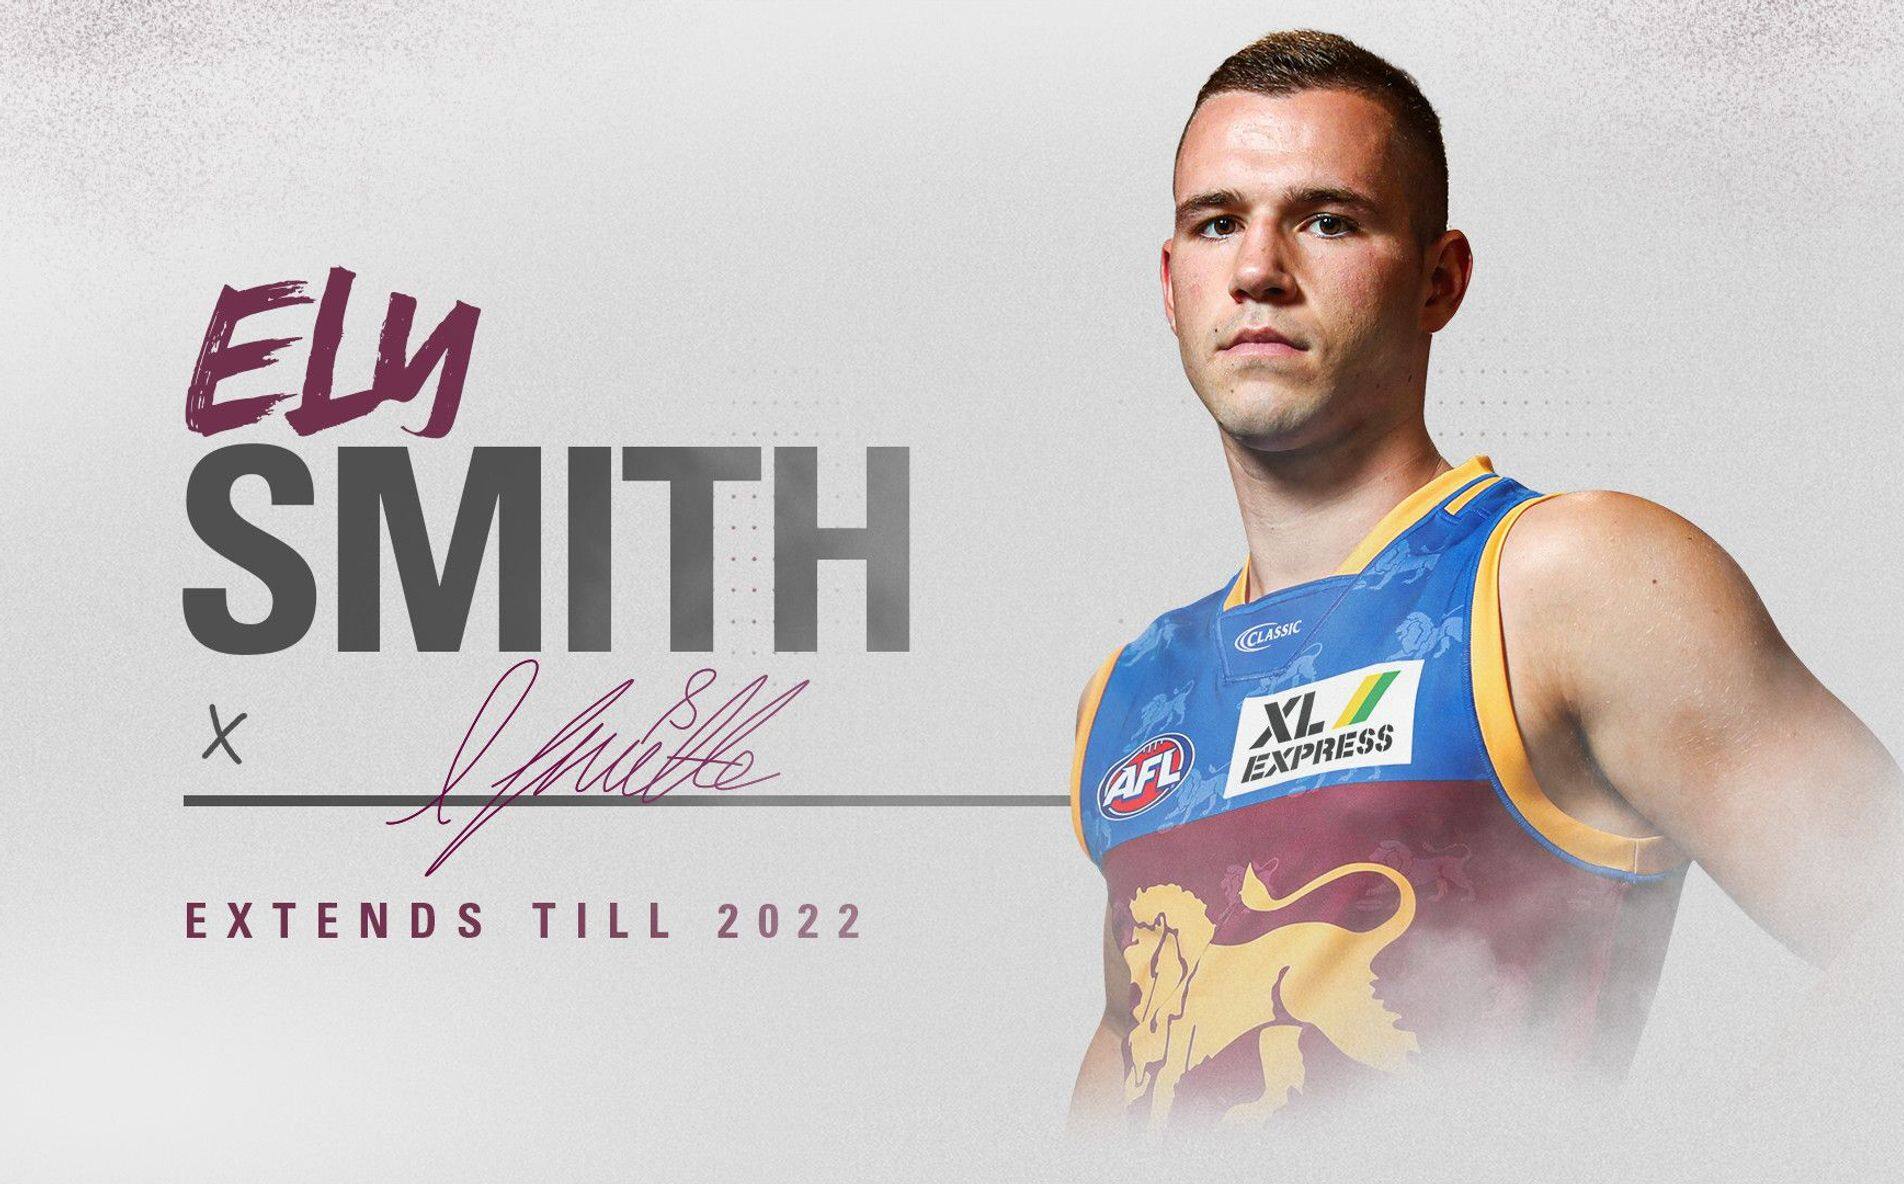 Ely Smith extends contract with Brisbane Lions Pennant Hills AFL